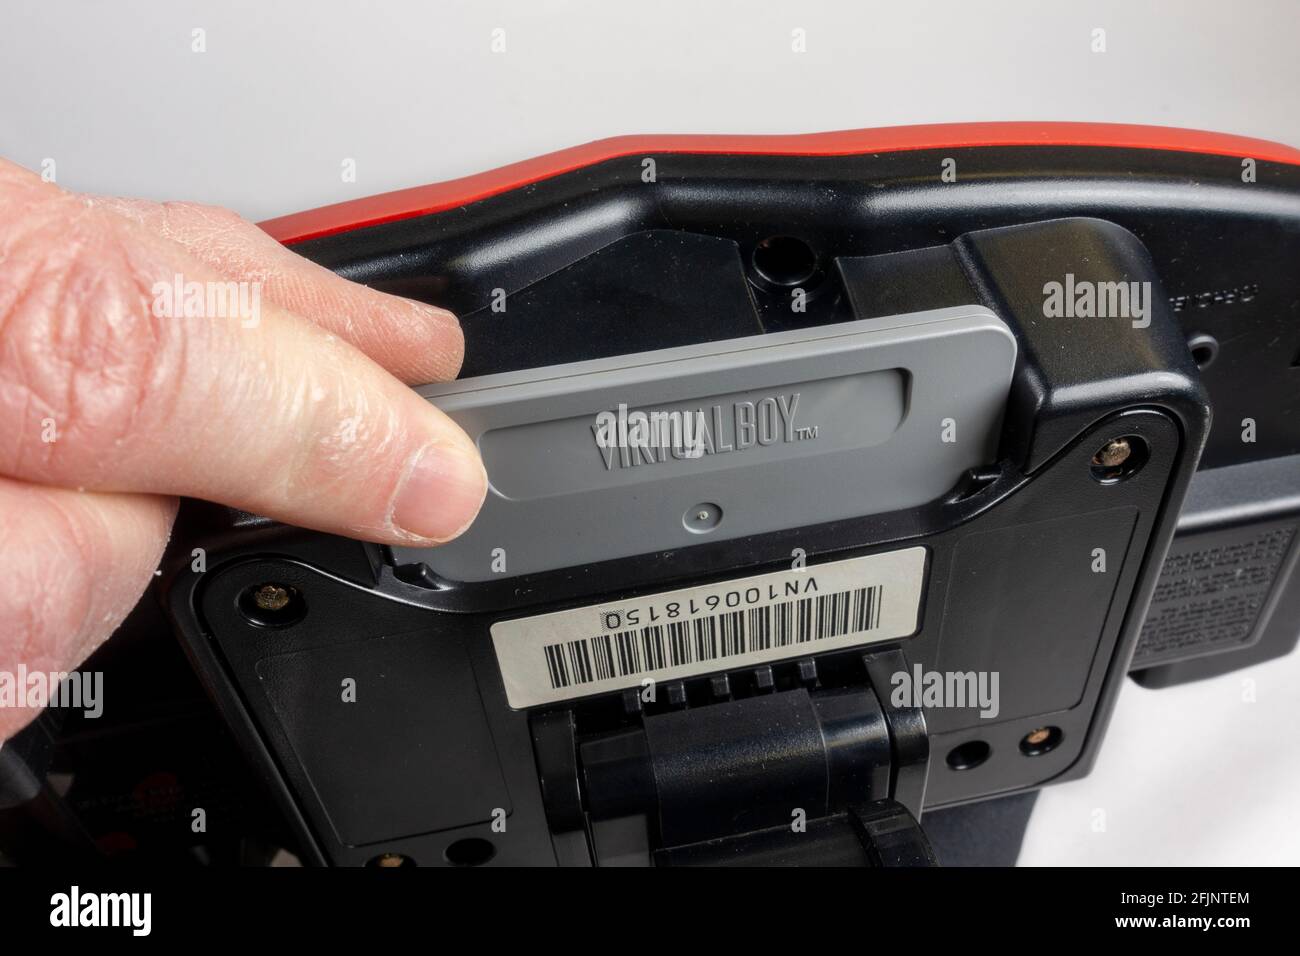 Putting a game cartridge in the slot of a Nintendo Virtual Boy table-top video game console, launched in Japan 1995, (it did not launch in Europe). Stock Photo